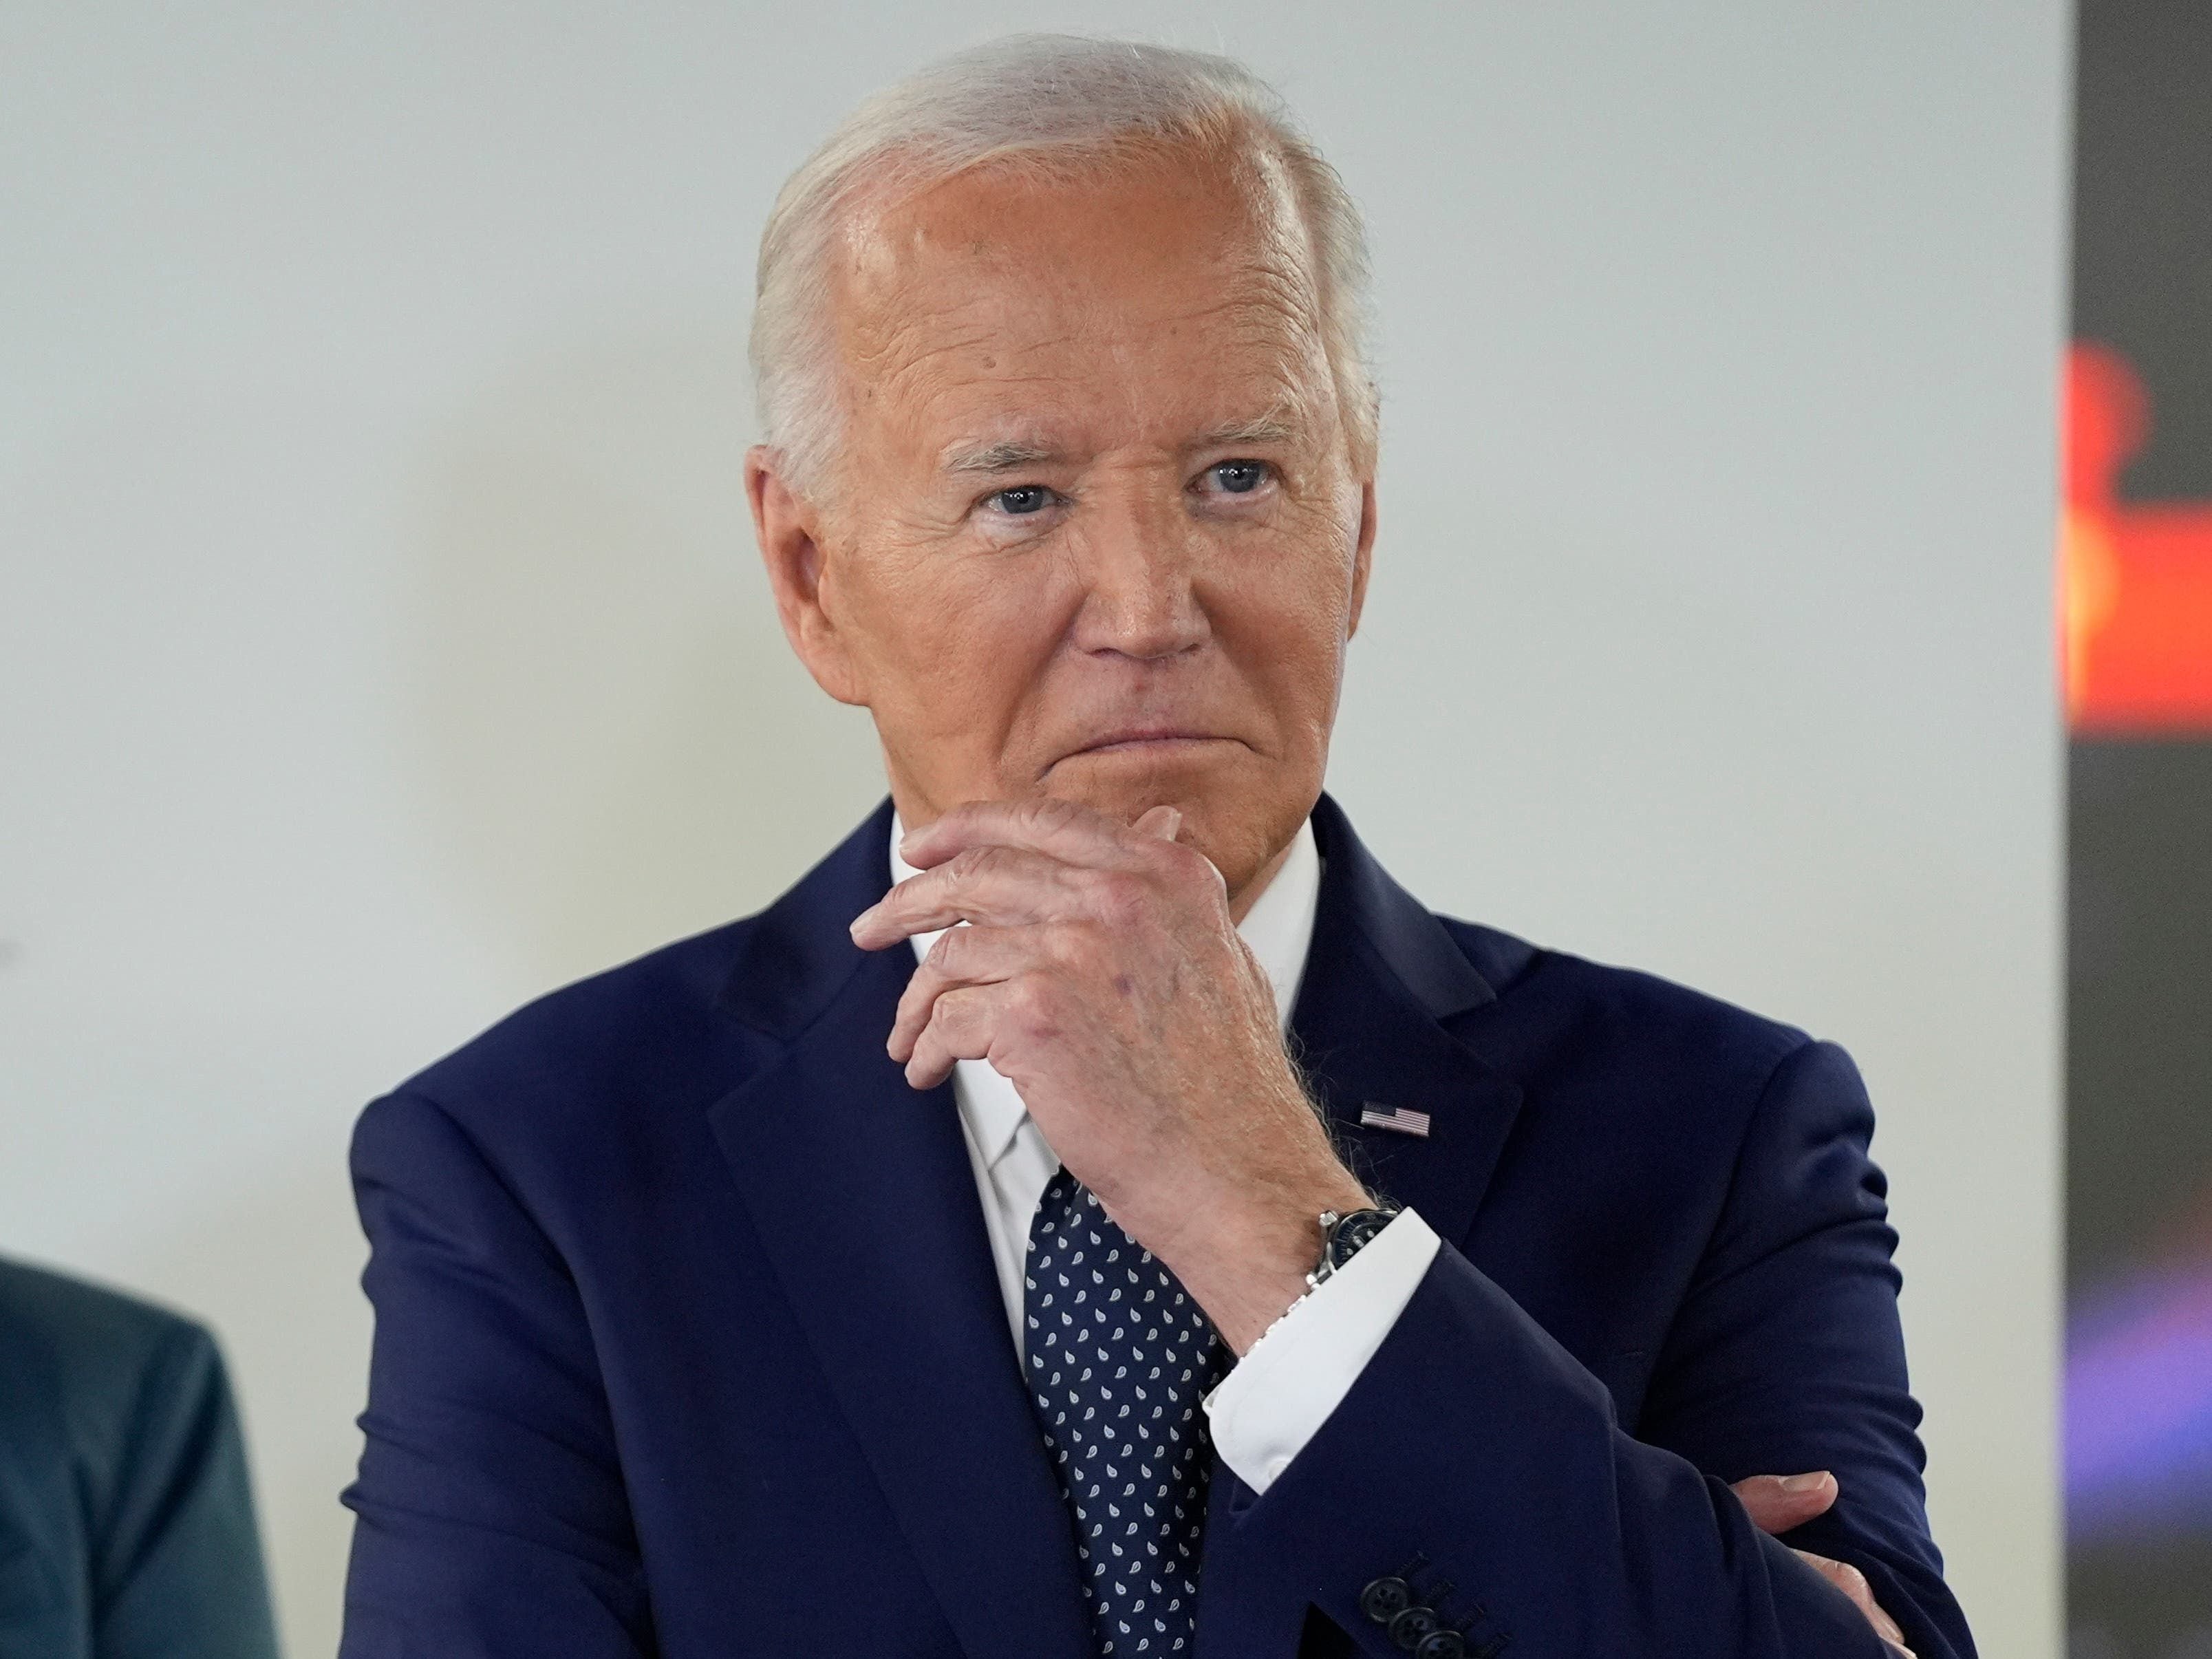 No one is pushing me out – I am still running for president, says Biden